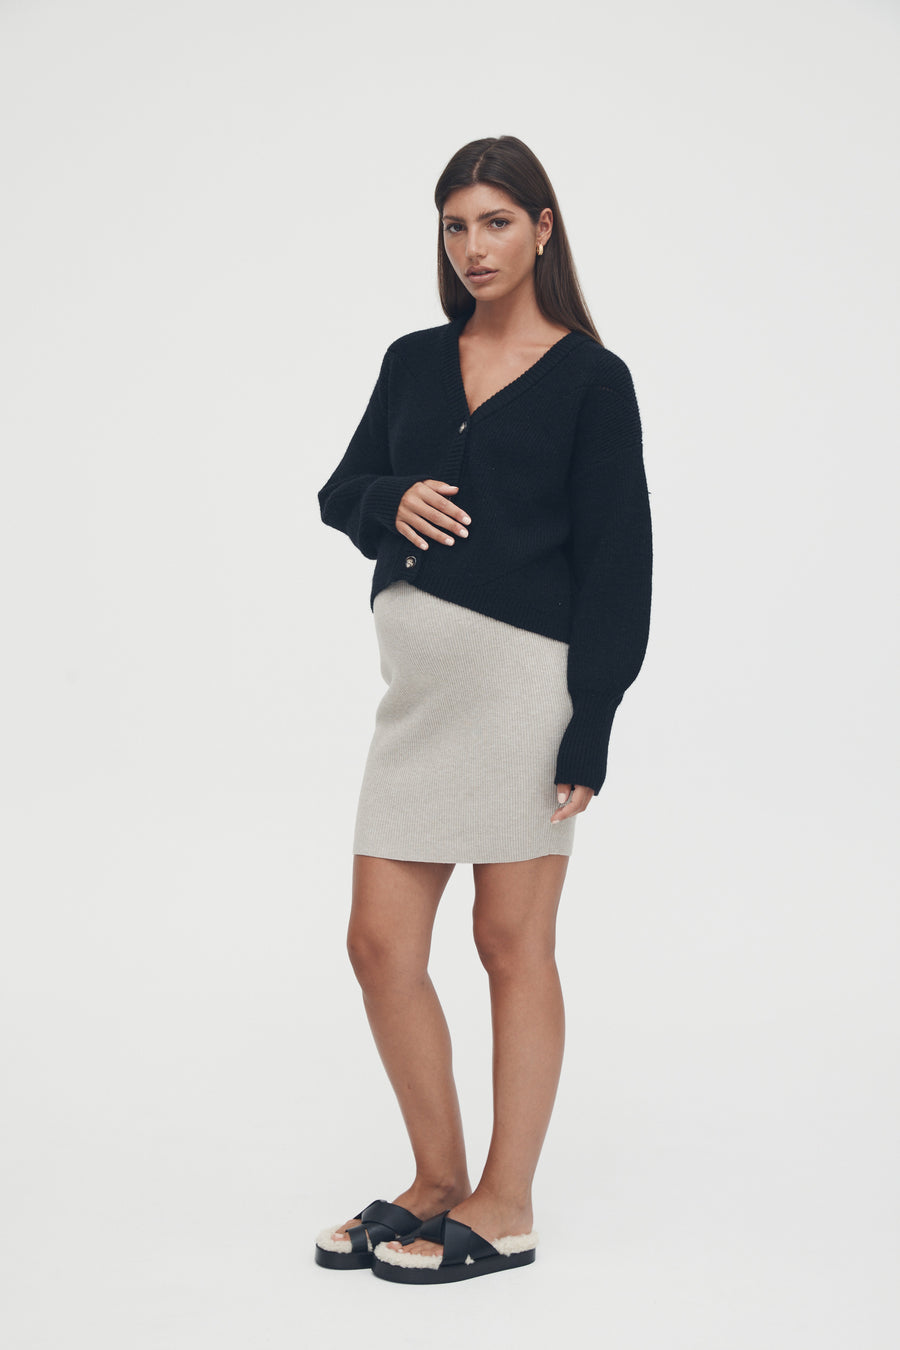 Stretchy Maternity Skirt (Taupe) 1